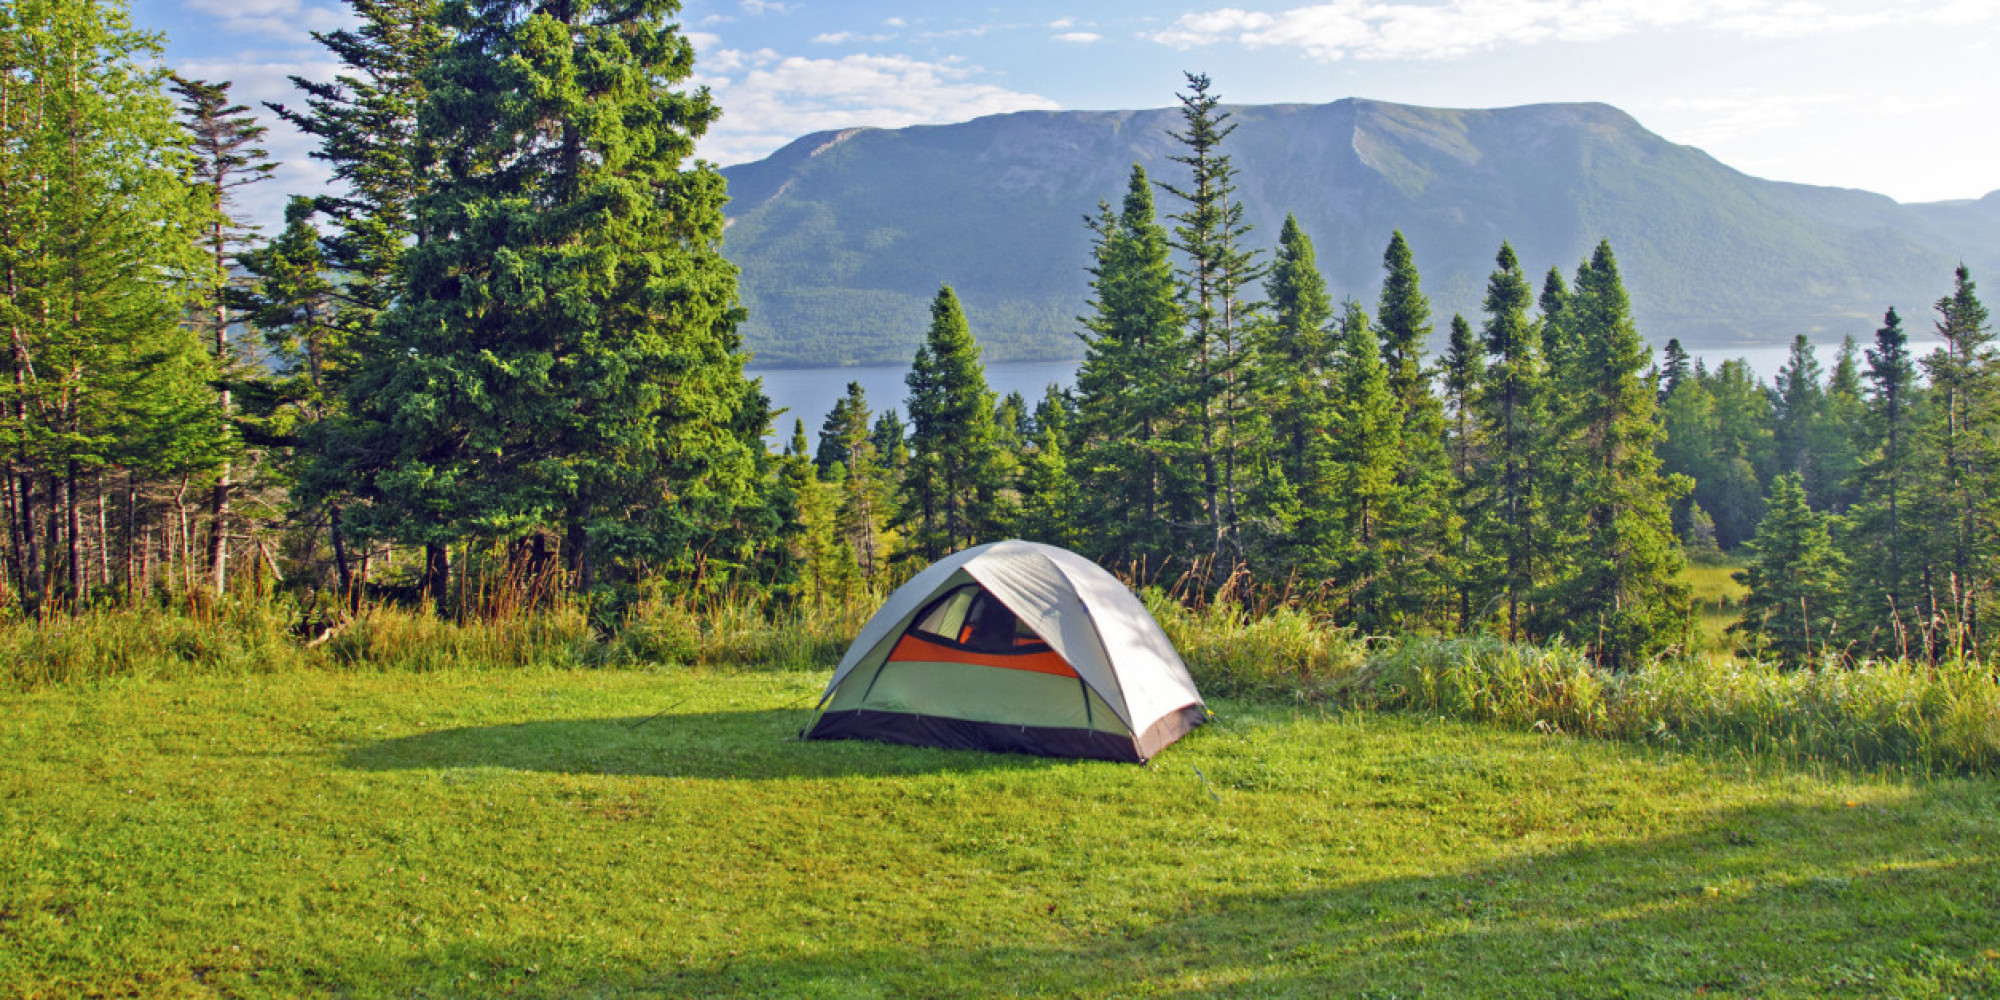 30 Of The Best Places To Camp In Canada